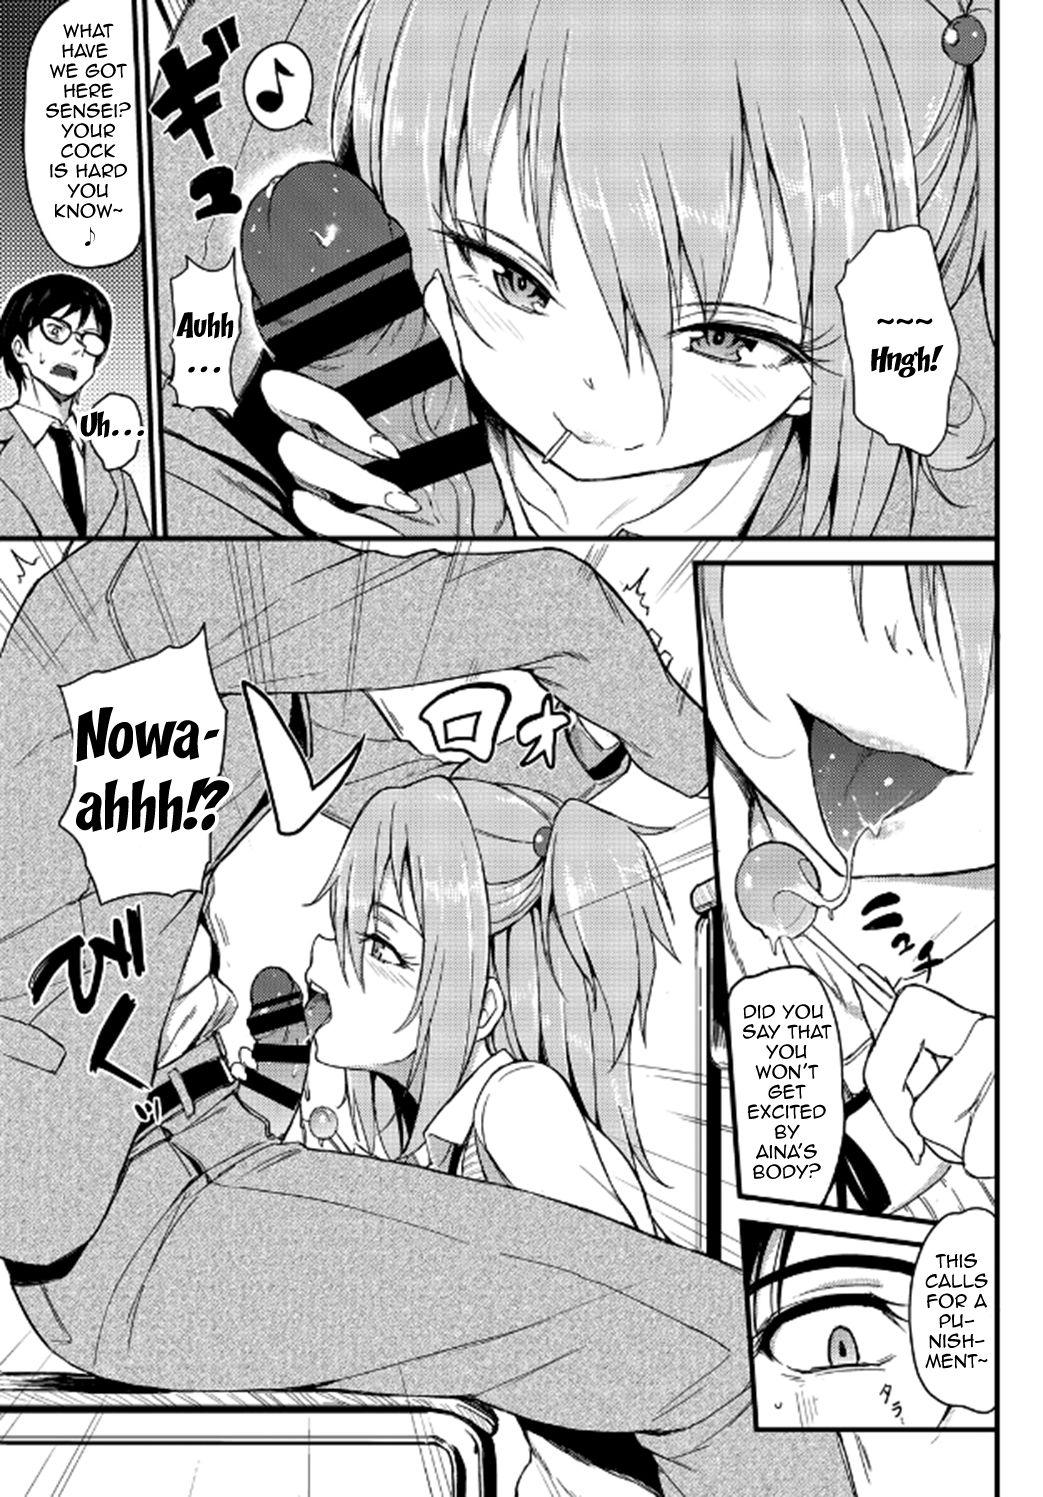 Best Blowjobs Ever Lovely Aina-chan Story - Page 5